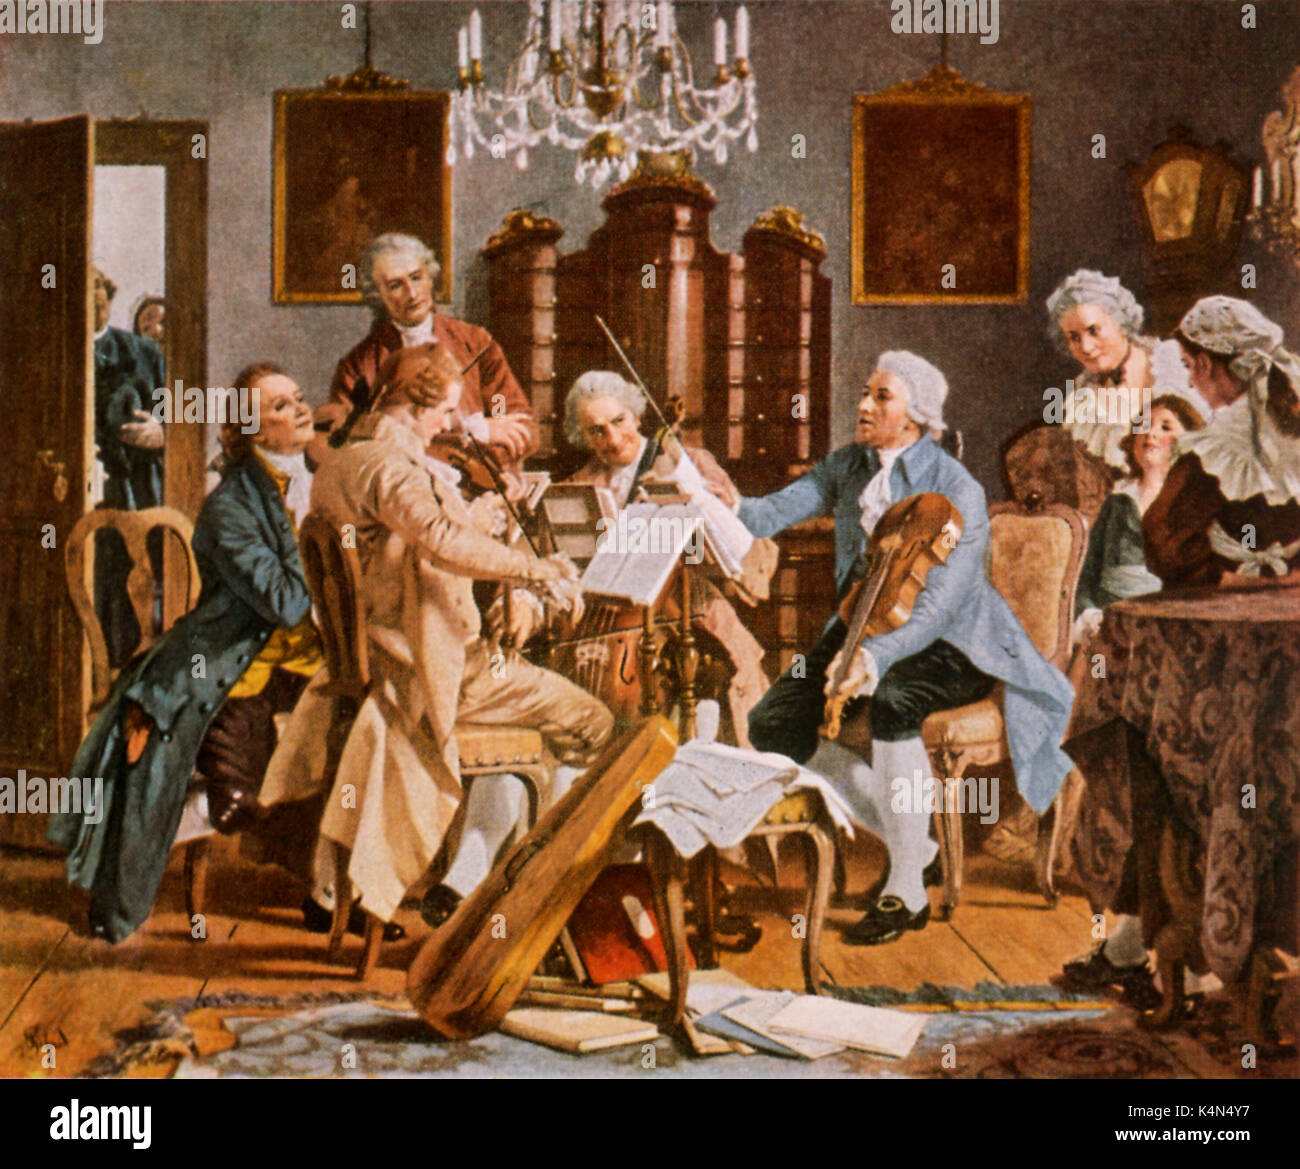 HAYDN, F J - playing in string quartet at Esterhazy. Austrian composer, 1732-1809. Classical Chamber Music Stock Photo